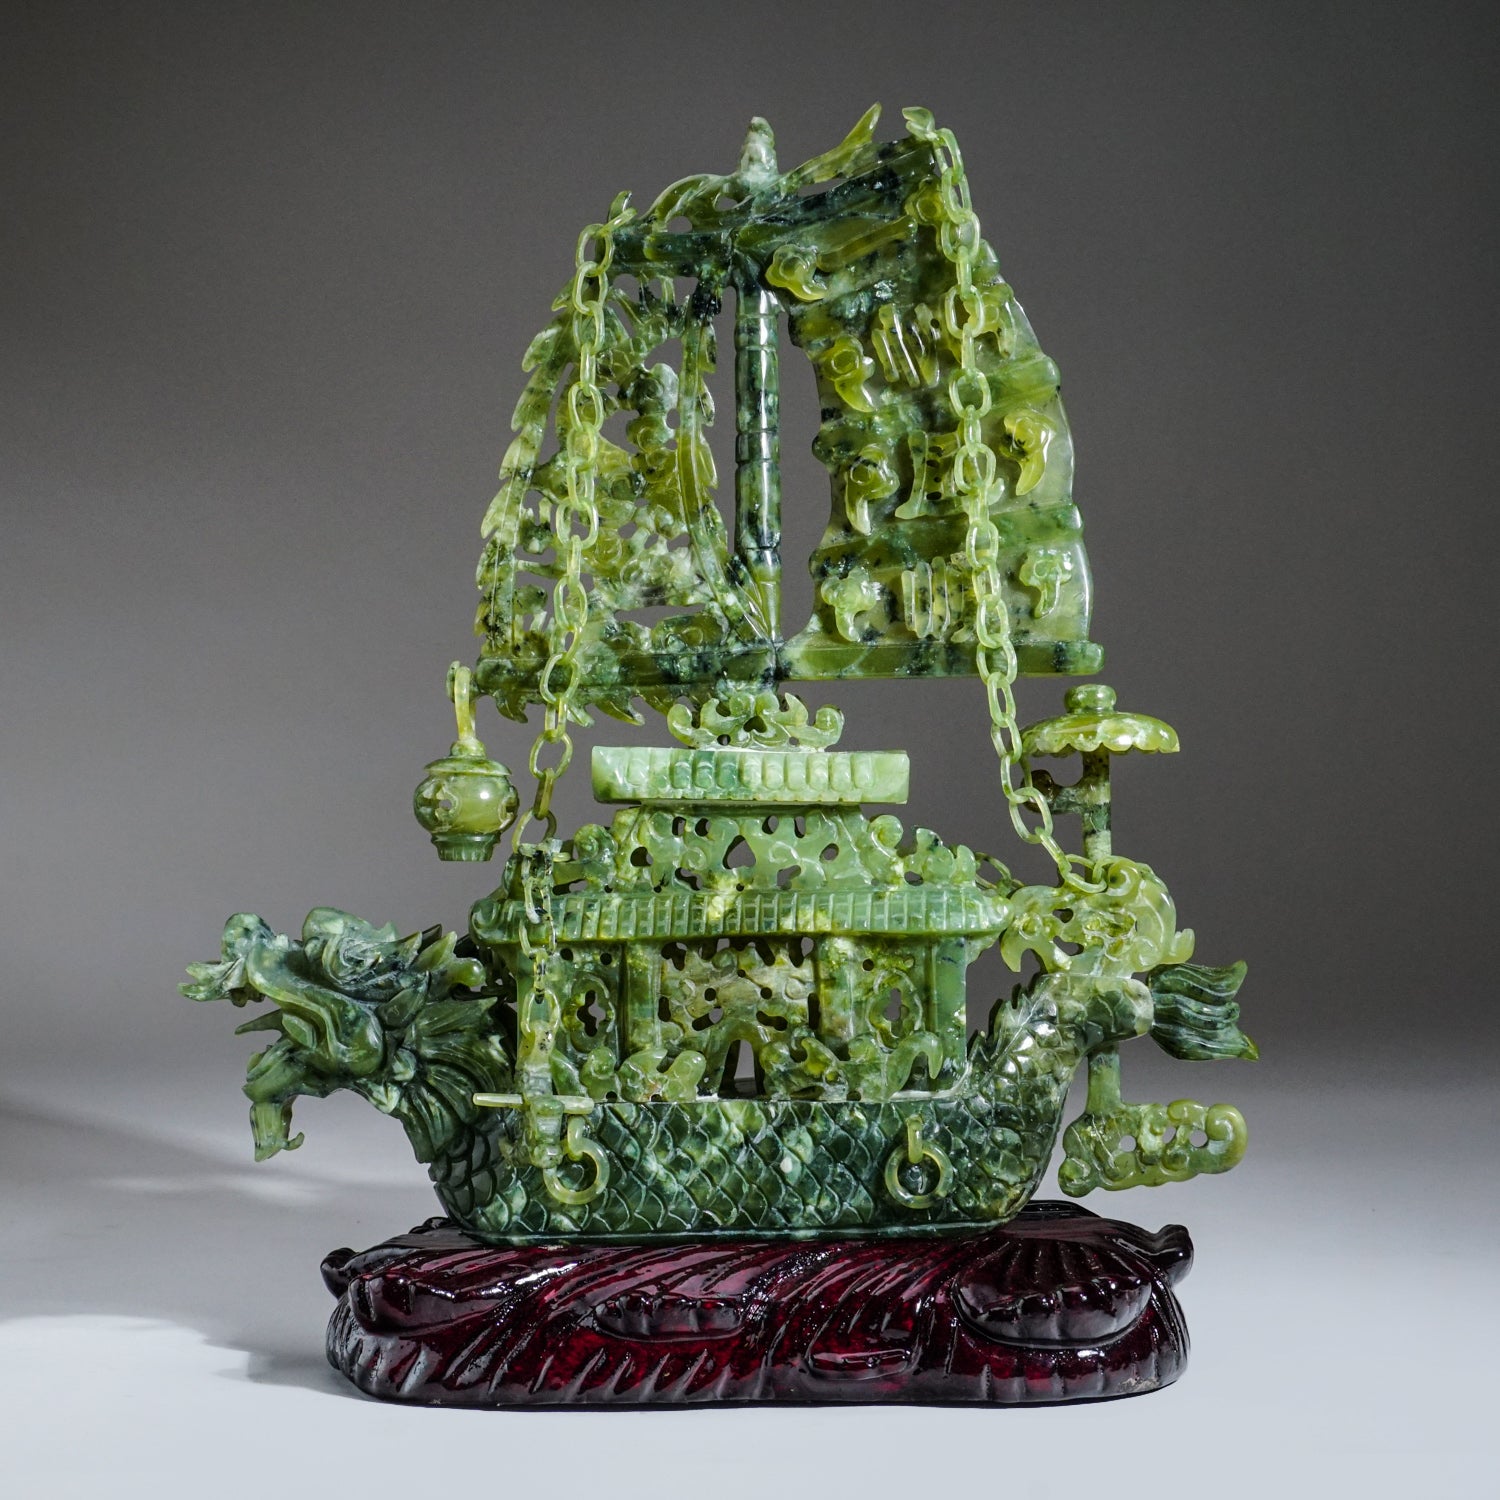 Genuine Polished Hand Carved Jade Ship on Wooden Display Stand